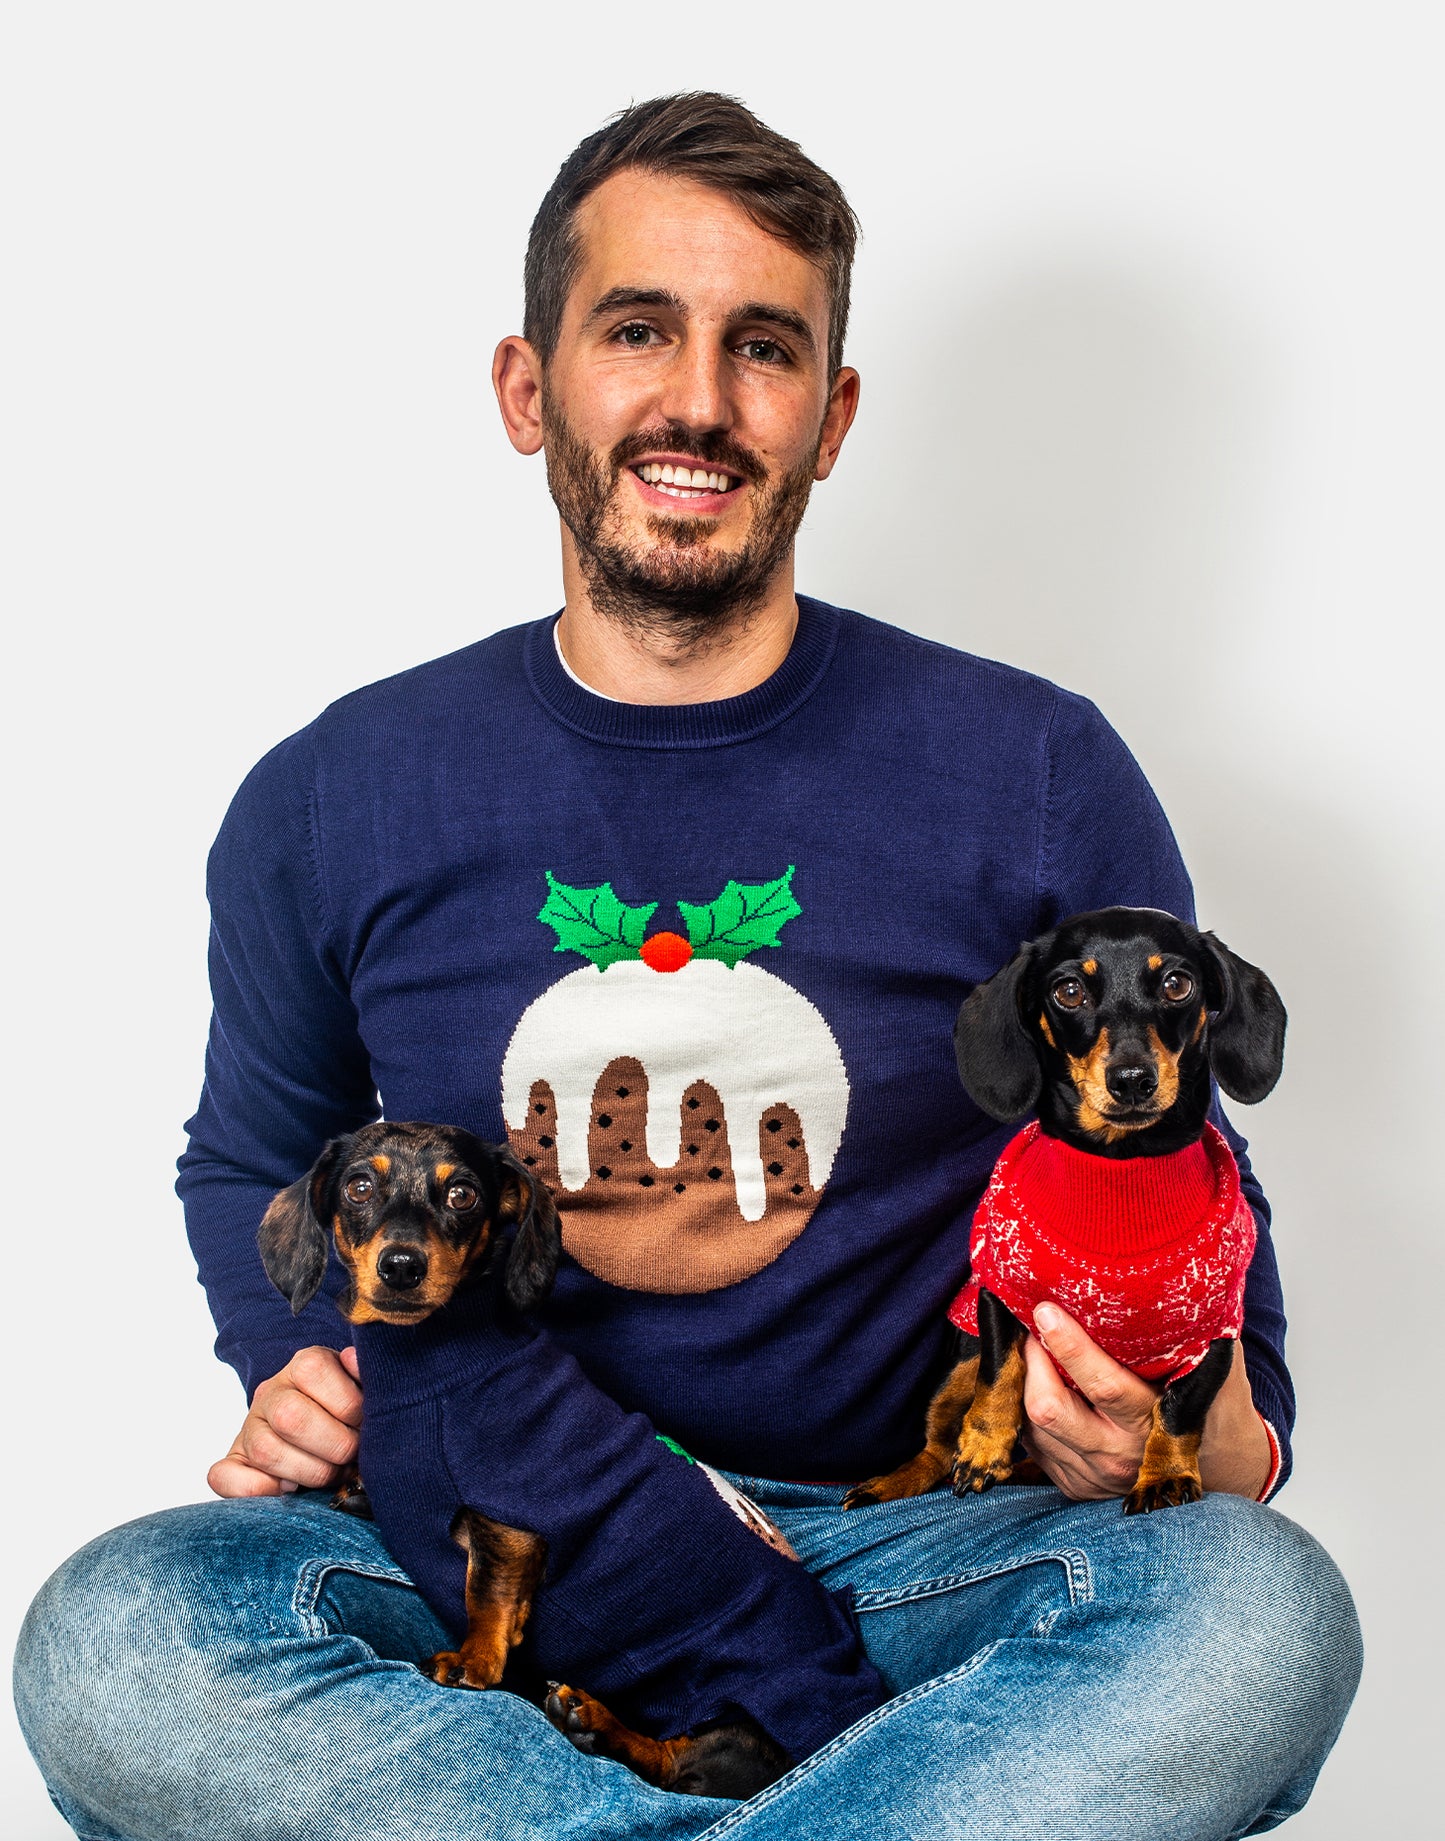 The Pudding Unisex Christmas Jumper